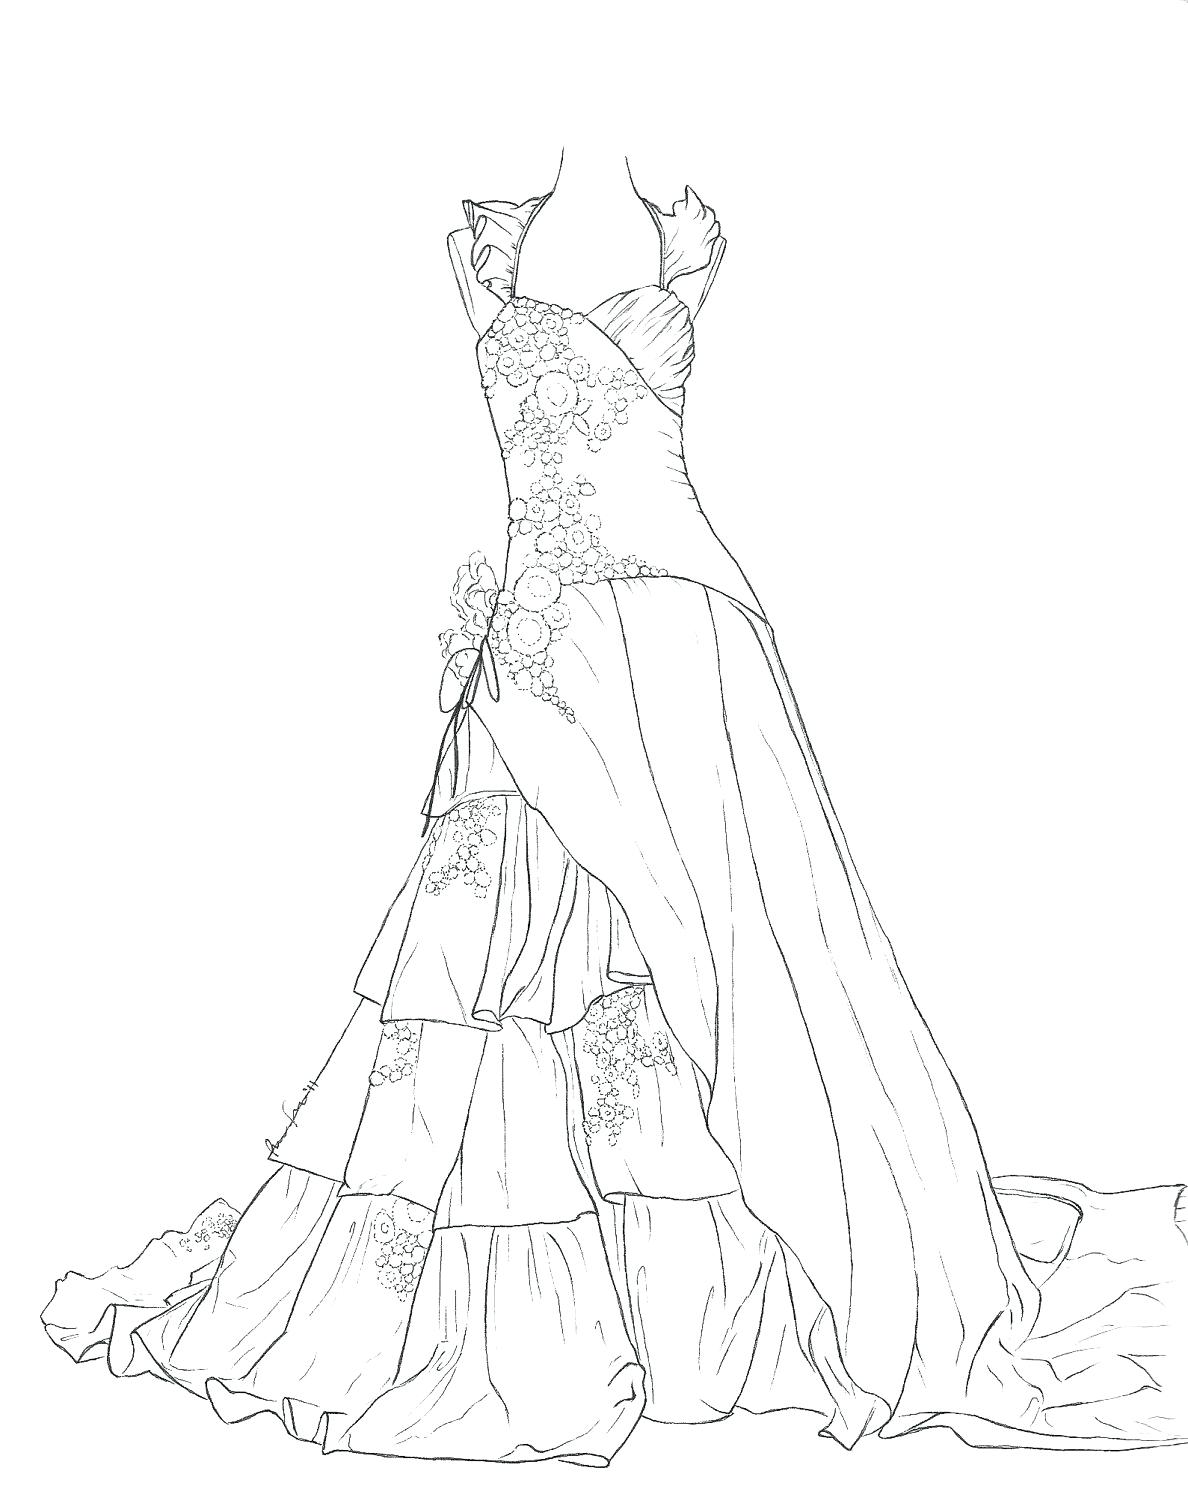 Girls Wearing Dresses Coloring Pages Coloring Pages